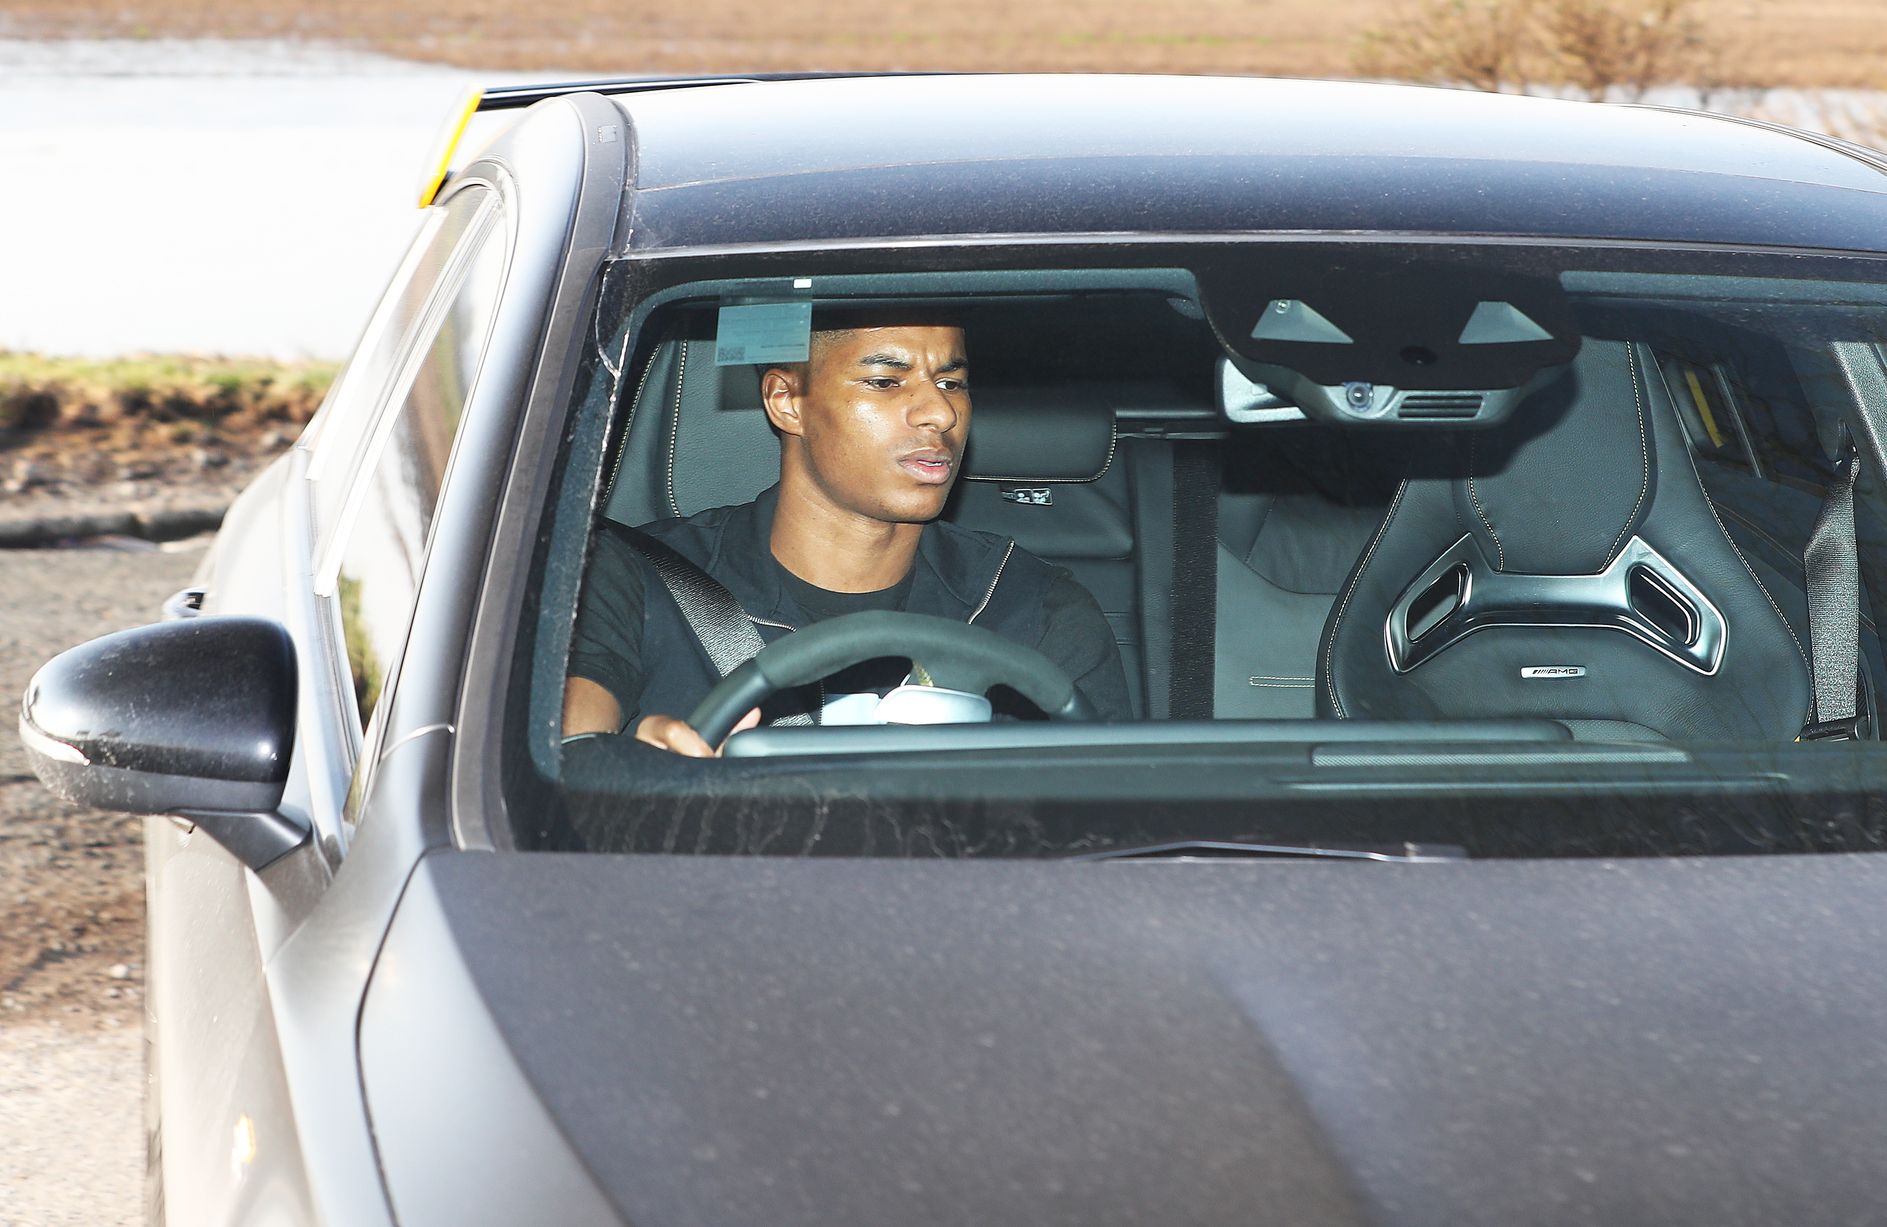 Pictures: Manchester United players arrive at Carrington as Man City preparations begin - Bóng Đá